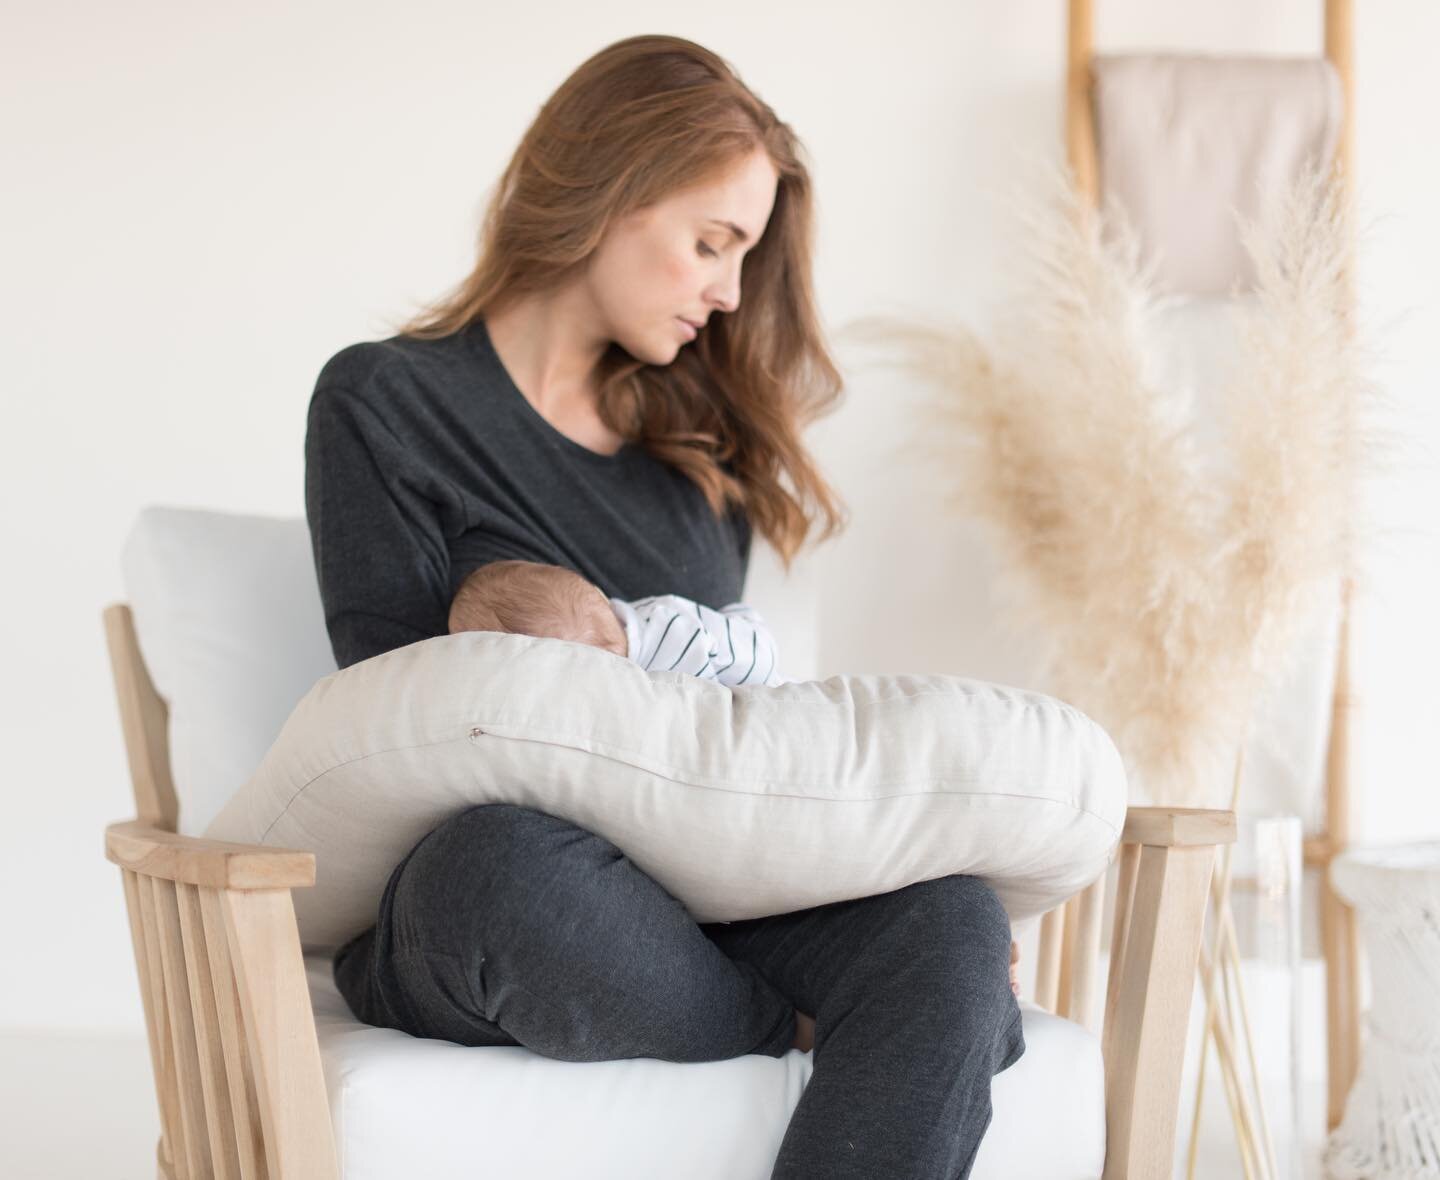 Make breastfeeding a breeze with our pure linen feeding pillow.

The hypoallergenic and chemical-free fabric is gentle on your baby's delicate skin and the perfect support for you during those precious feeding moments.

#incababylinen #babylinen #pur